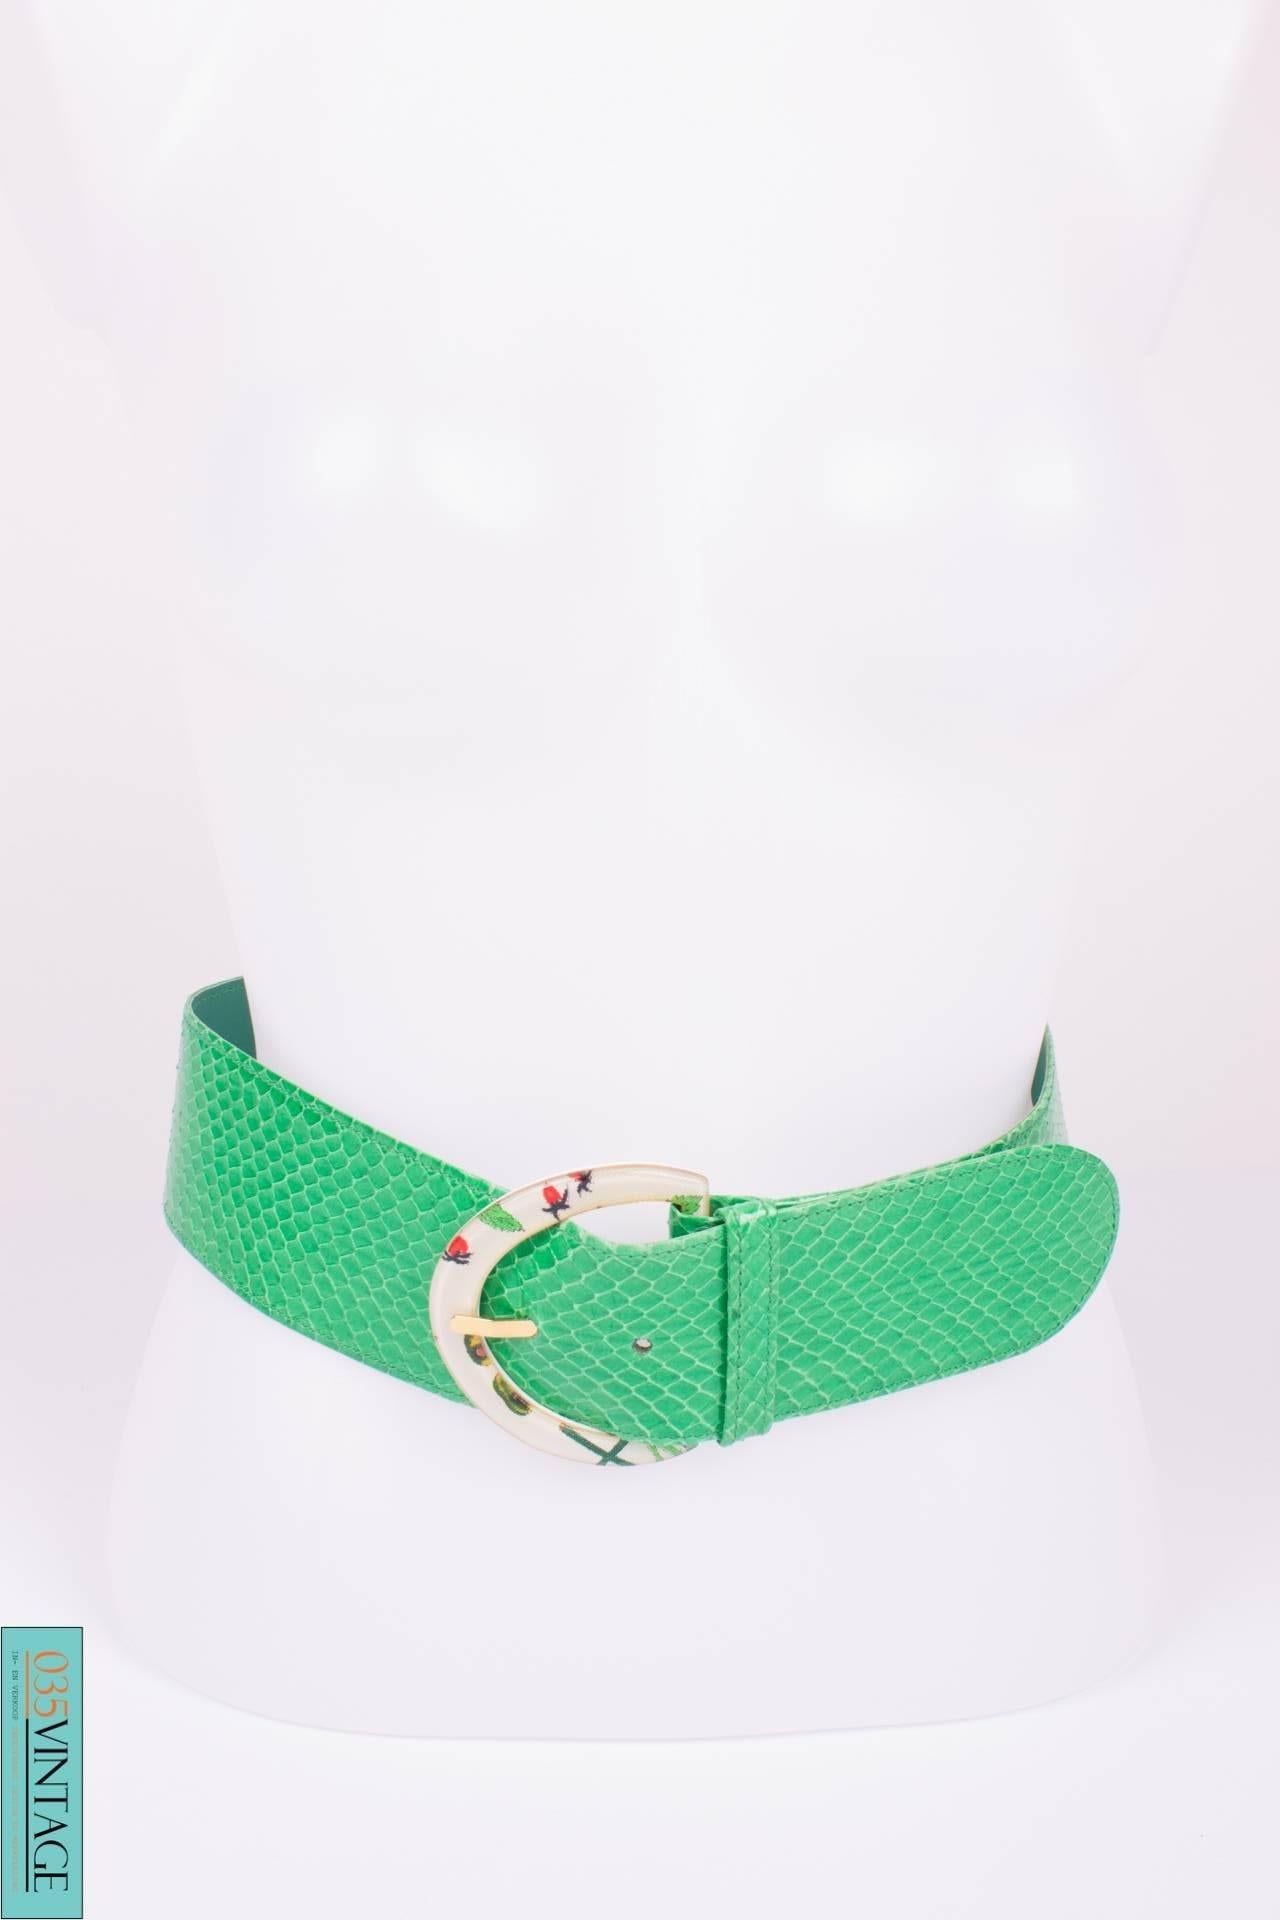 Brand: GUCCI

Material: bright green python leather

Buckle: white resin, red flowers, green leaves

Length: 75 cm

Width: 6 cm

Condition (1/10): 8